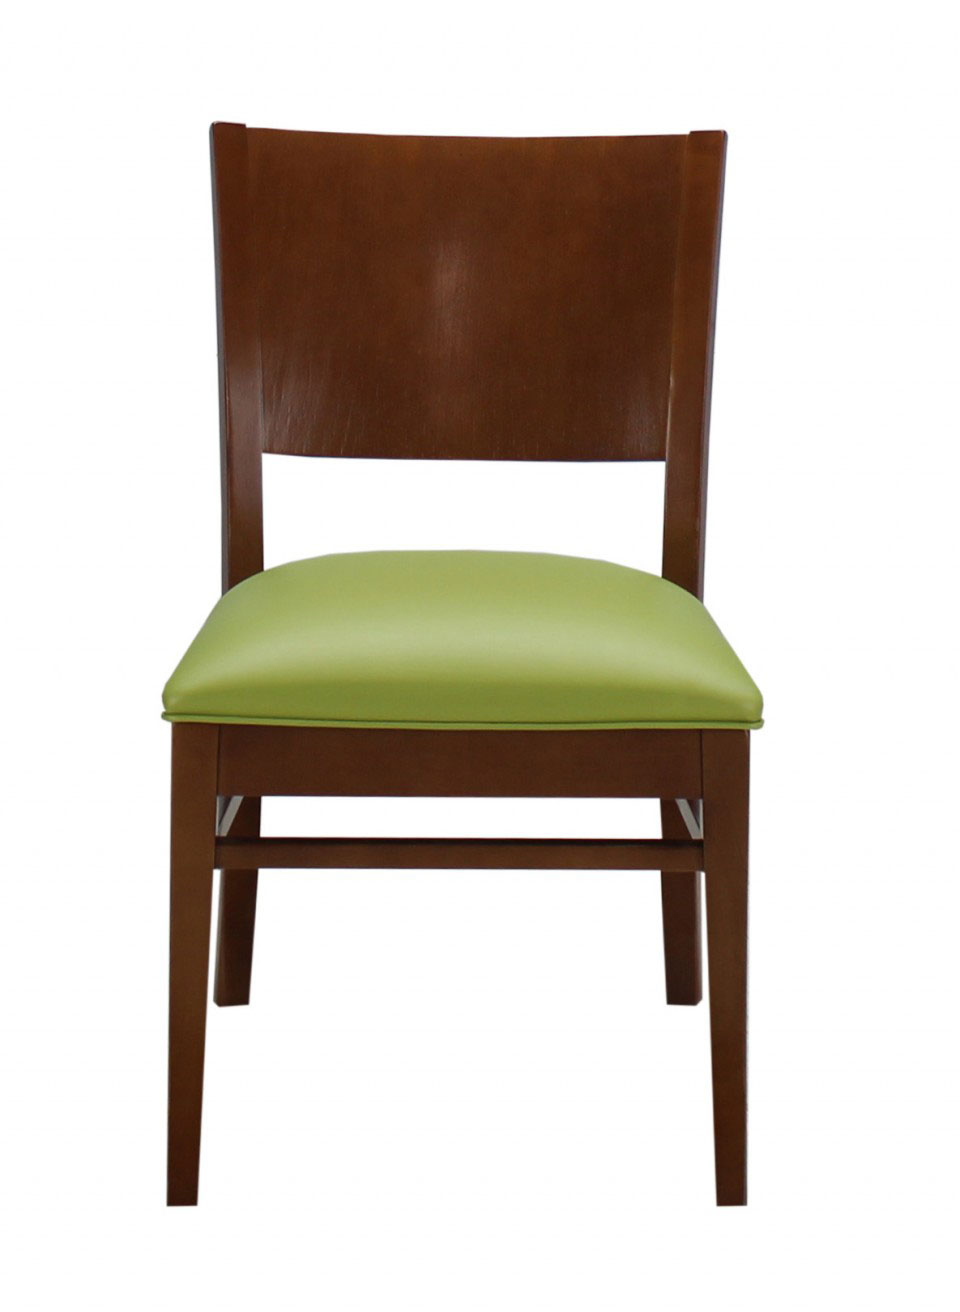 Magnolia_Chair_Front-960x1312